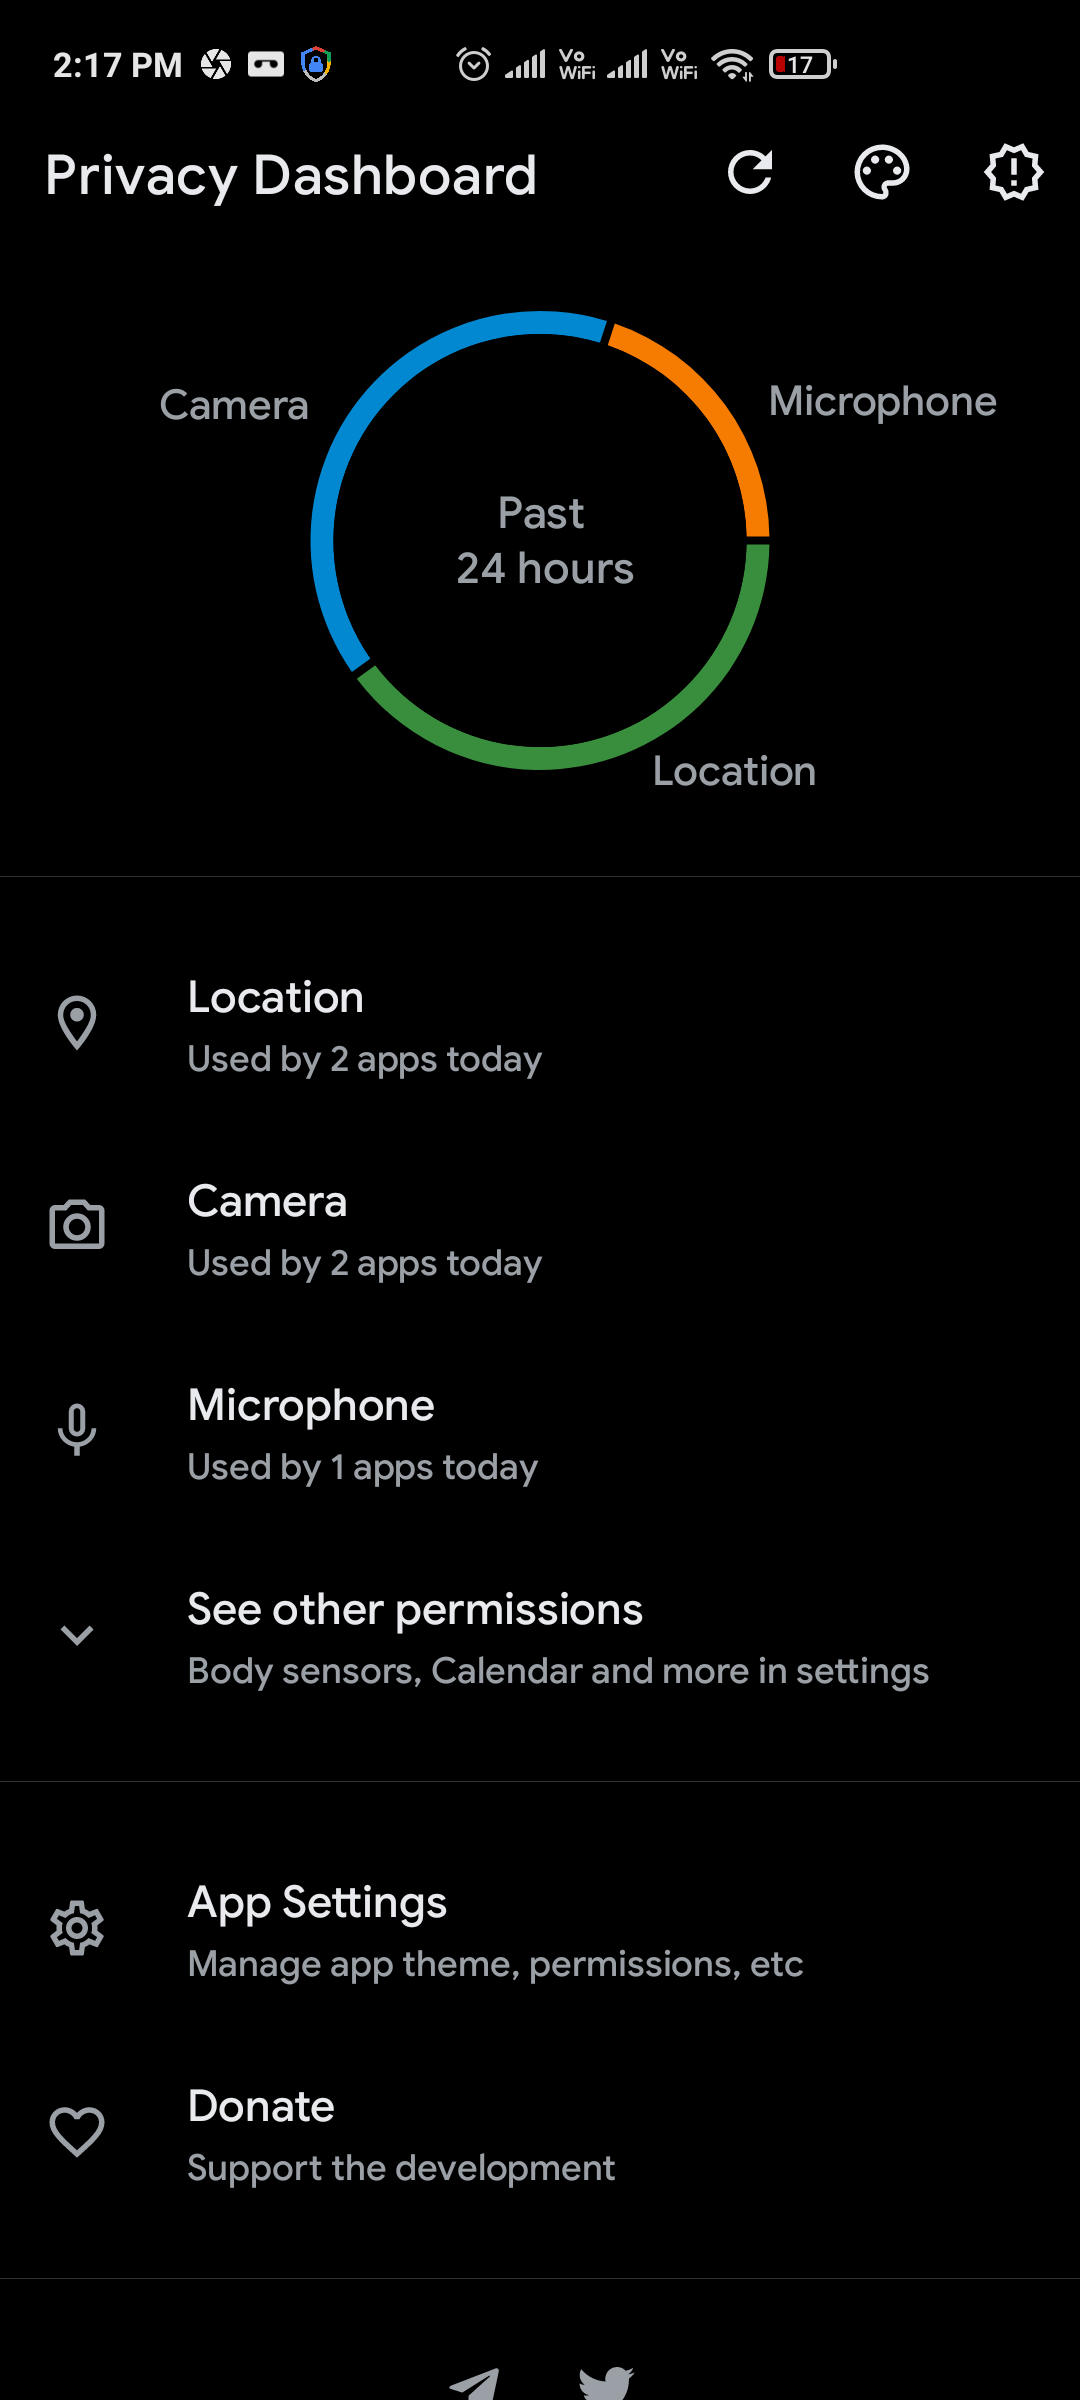 The privacy dashboard app showing the usage of sensitive permissions